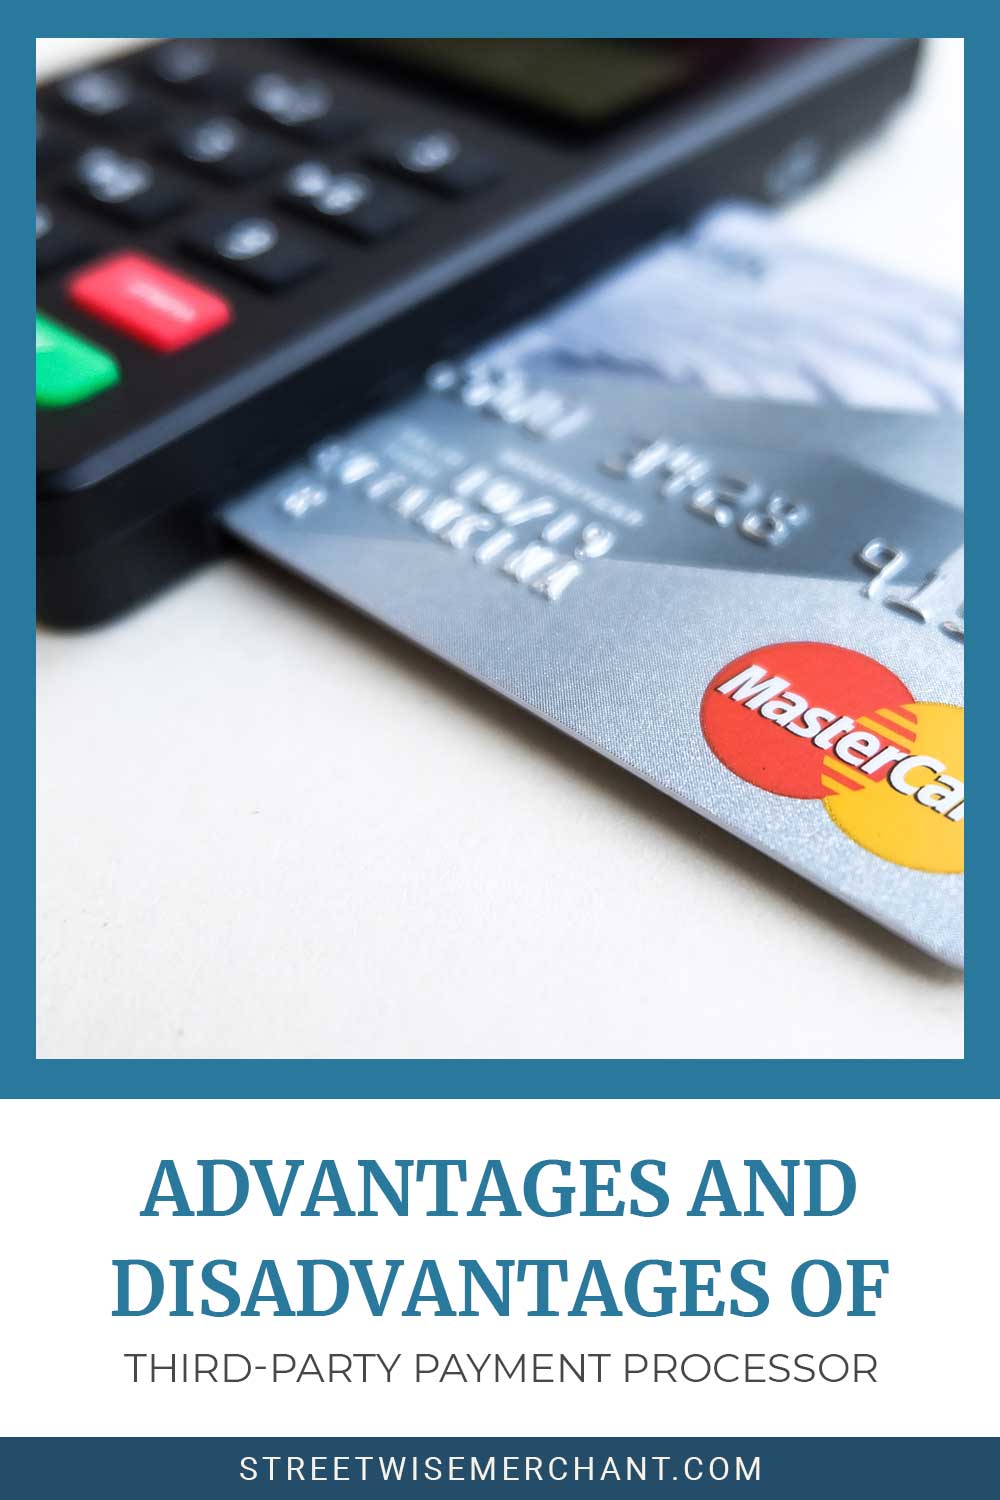 Payment card in a card reader on white surface - Advantages and Disadvantages of Third-Party Payment Processor.